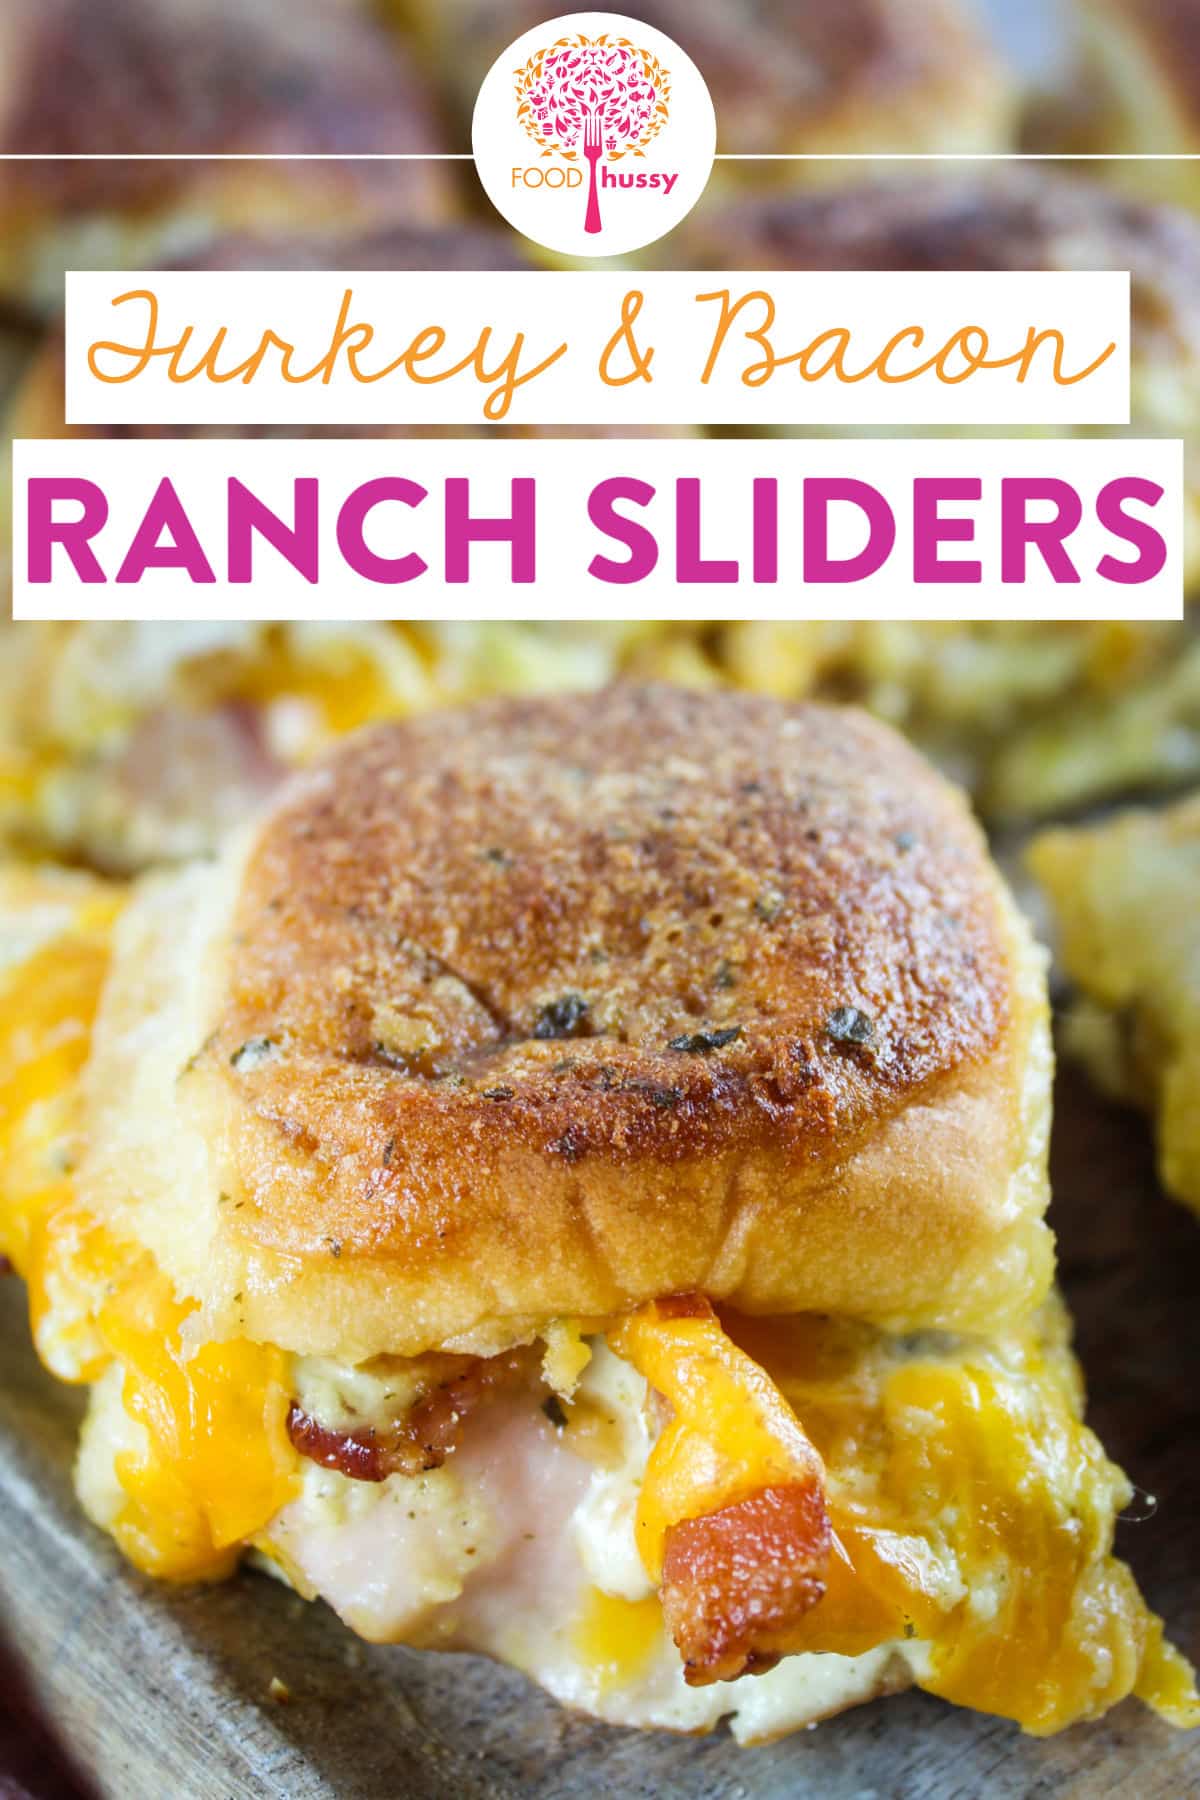 These Turkey Bacon Ranch Sliders are my favorite sliders! Every bite is so delicious - full of lean sliced turkey, crispy meaty bacon, melty cheddar cheese and loads of ranch dressing! Turkey, bacon & ranch are a great combination of flavors! via @foodhussy